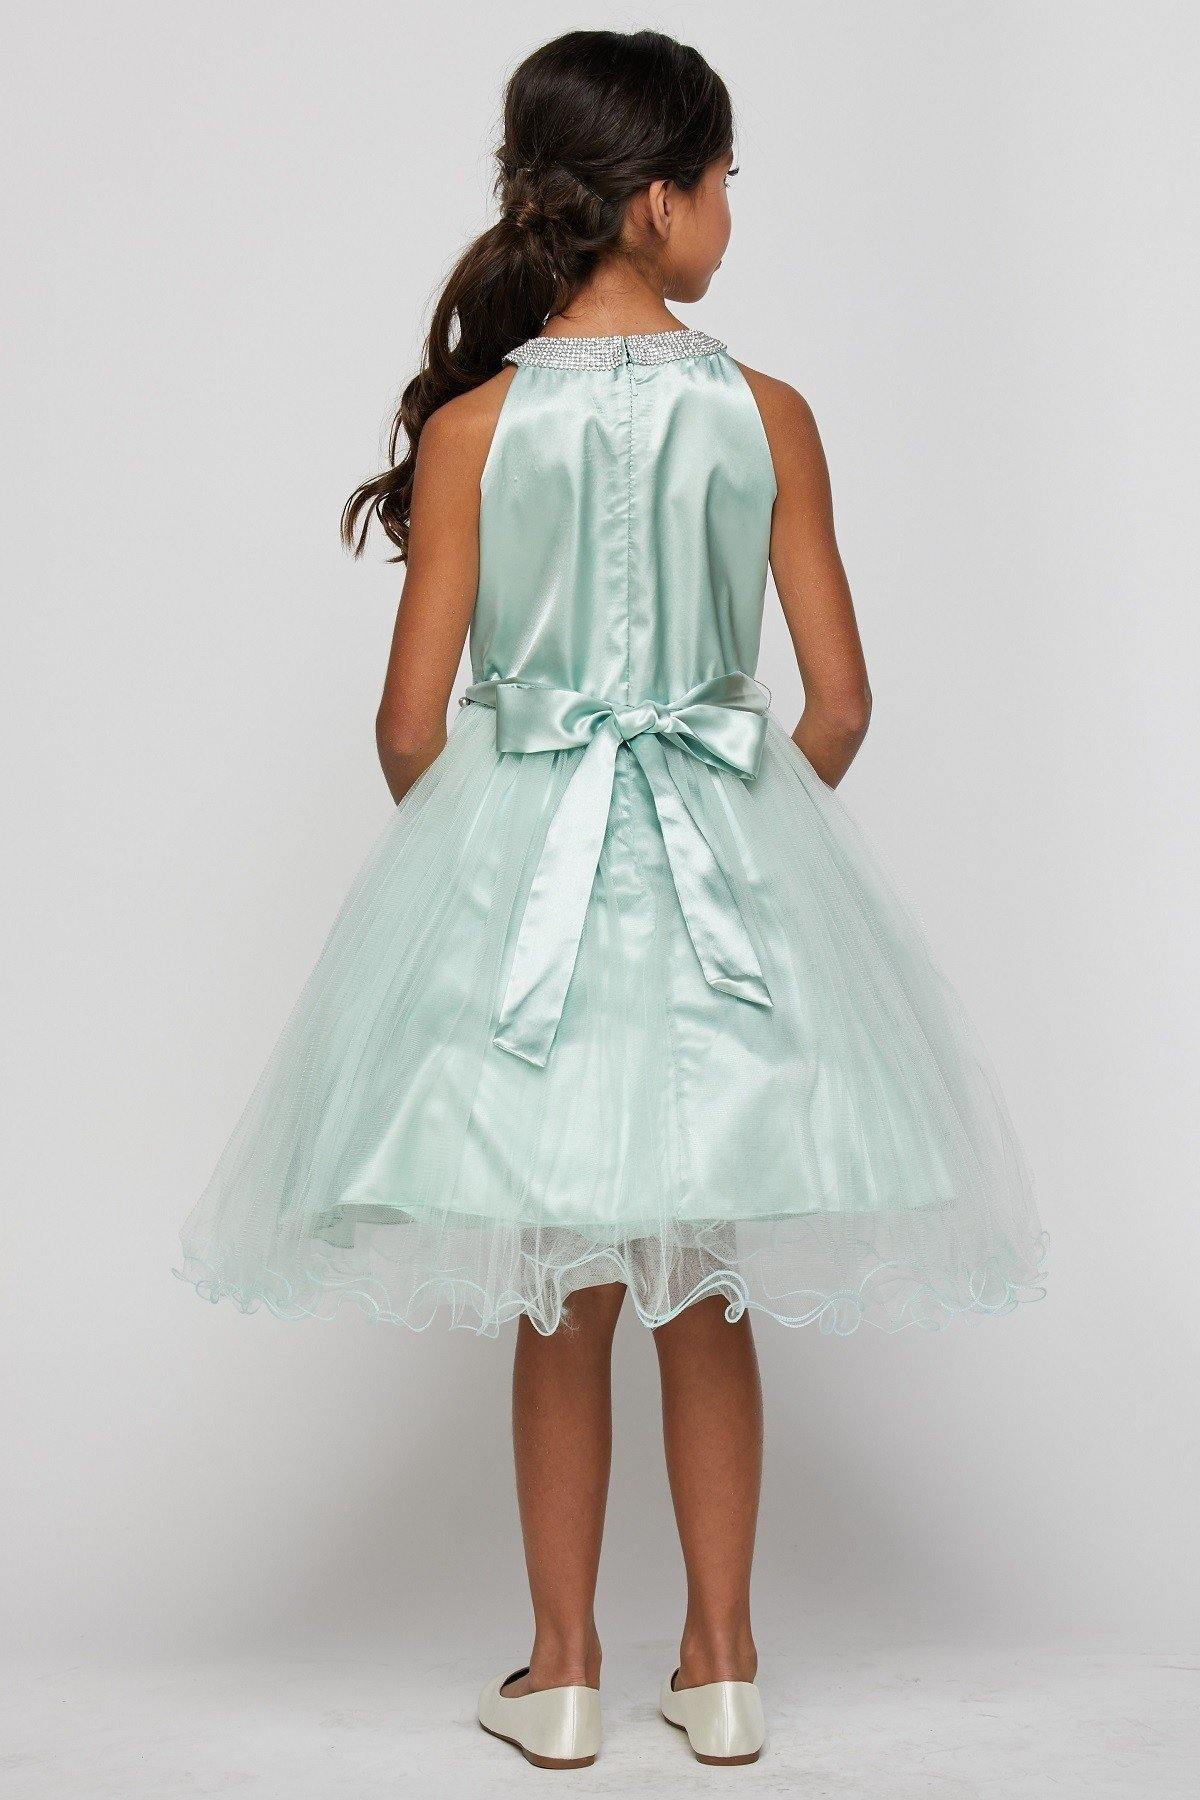 Short Halter Style Lace and Rhinestone Flower Girl Dress - The Dress Outlet Cinderella Couture